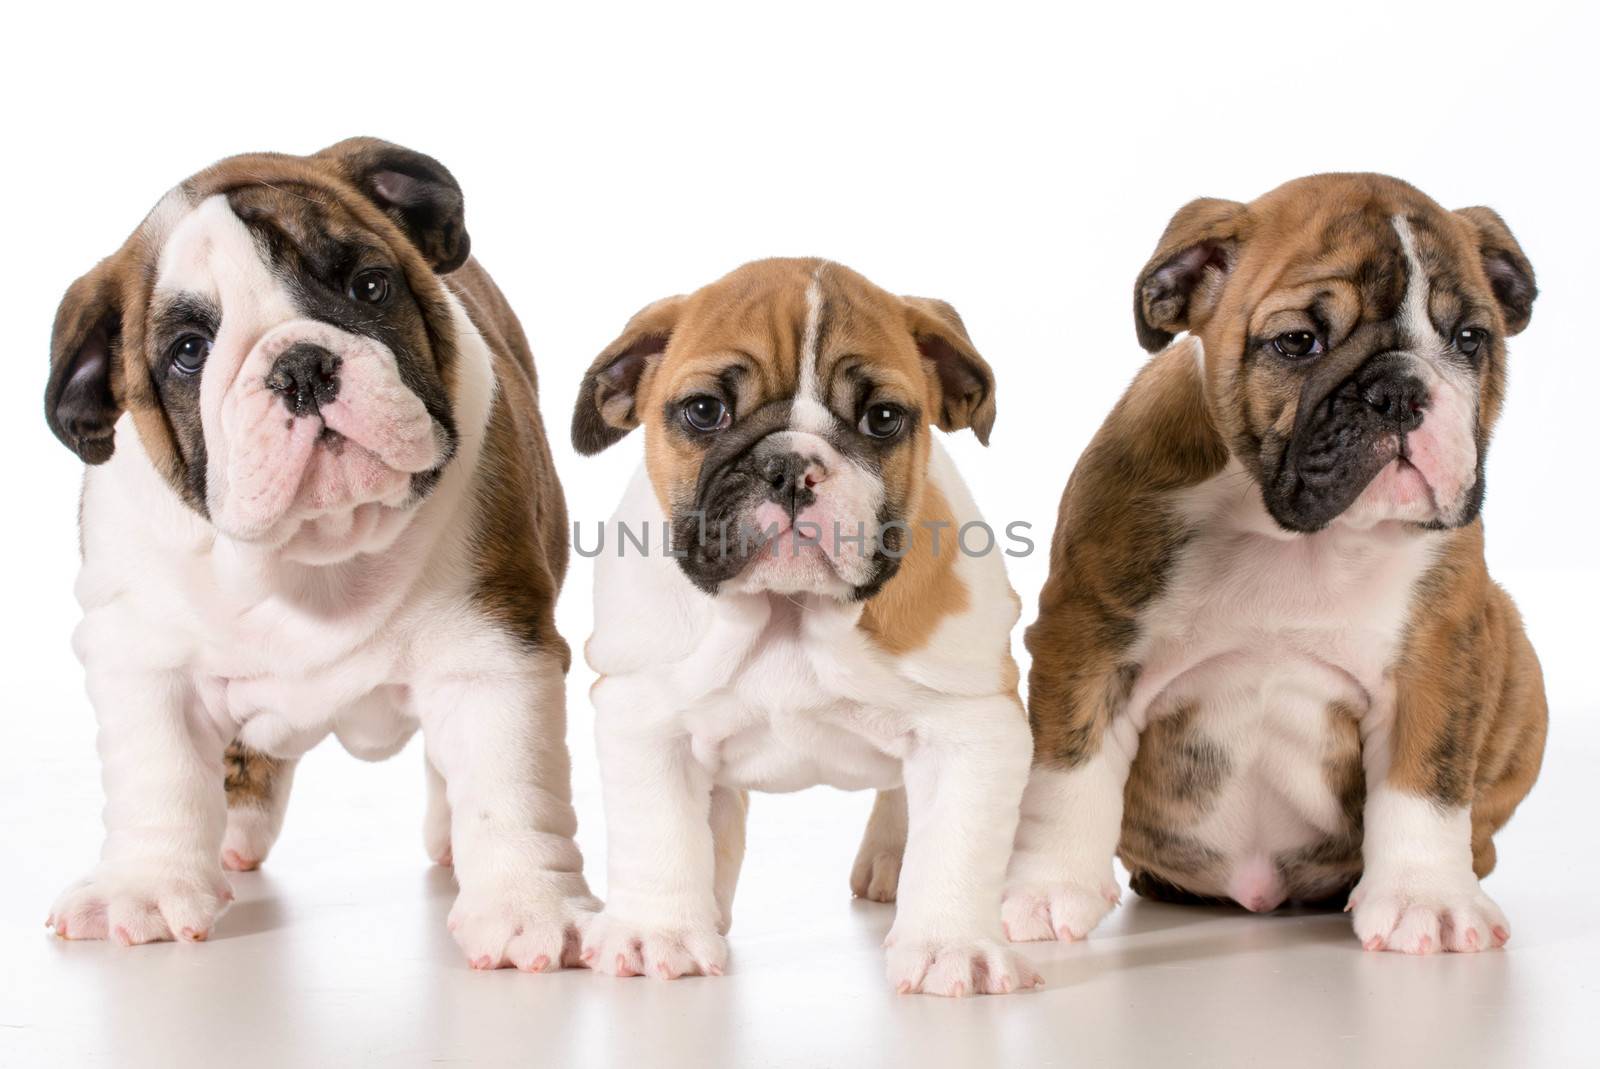 bulldog puppies by willeecole123